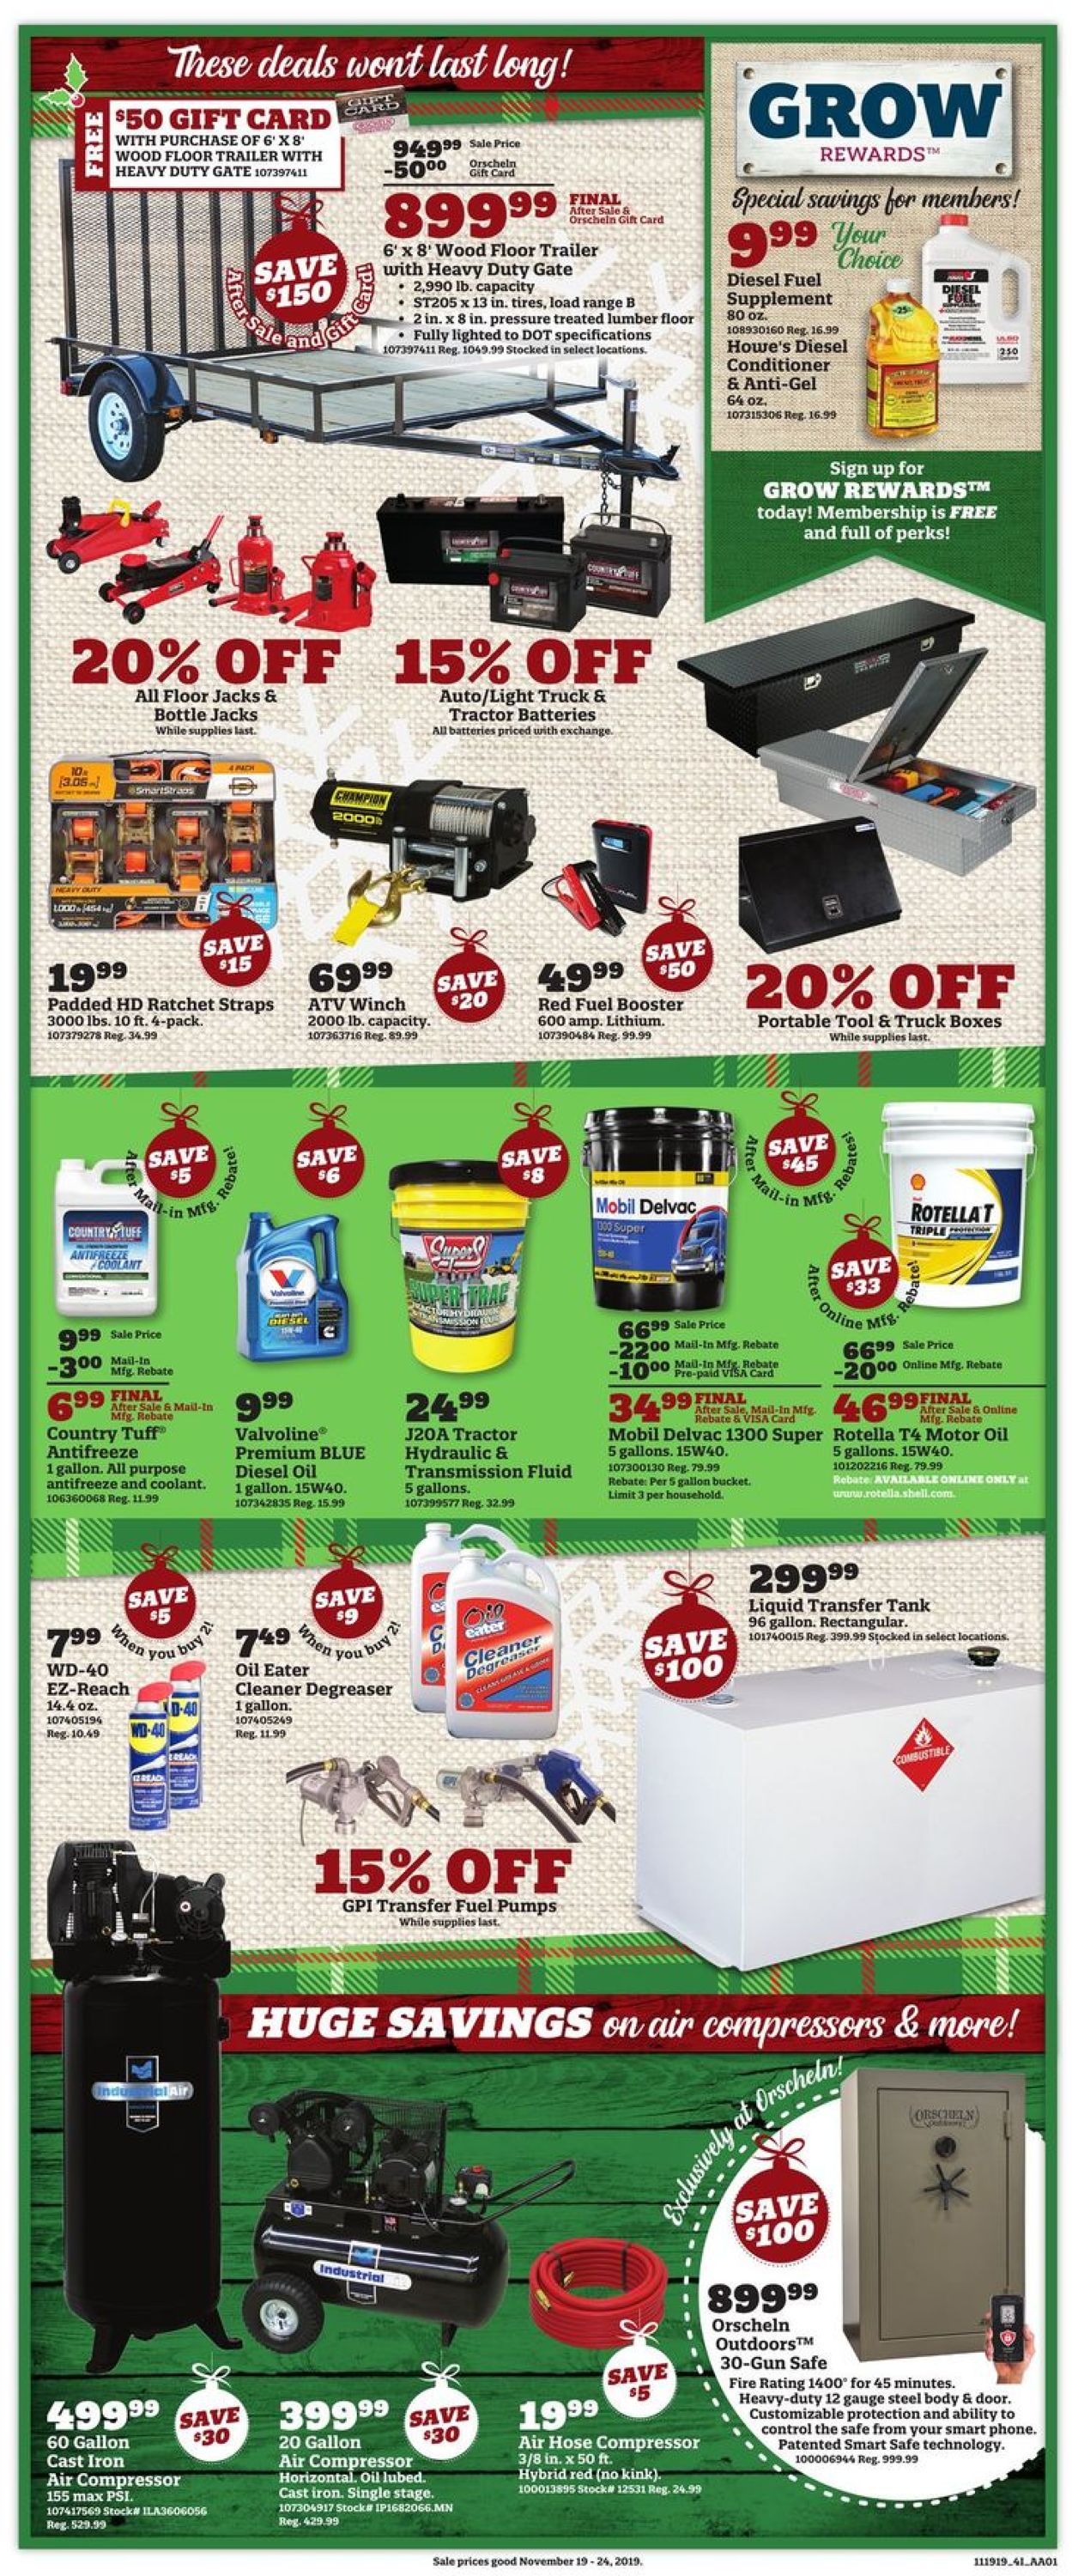 Orscheln Farm and Home Ad from 11/19/2019